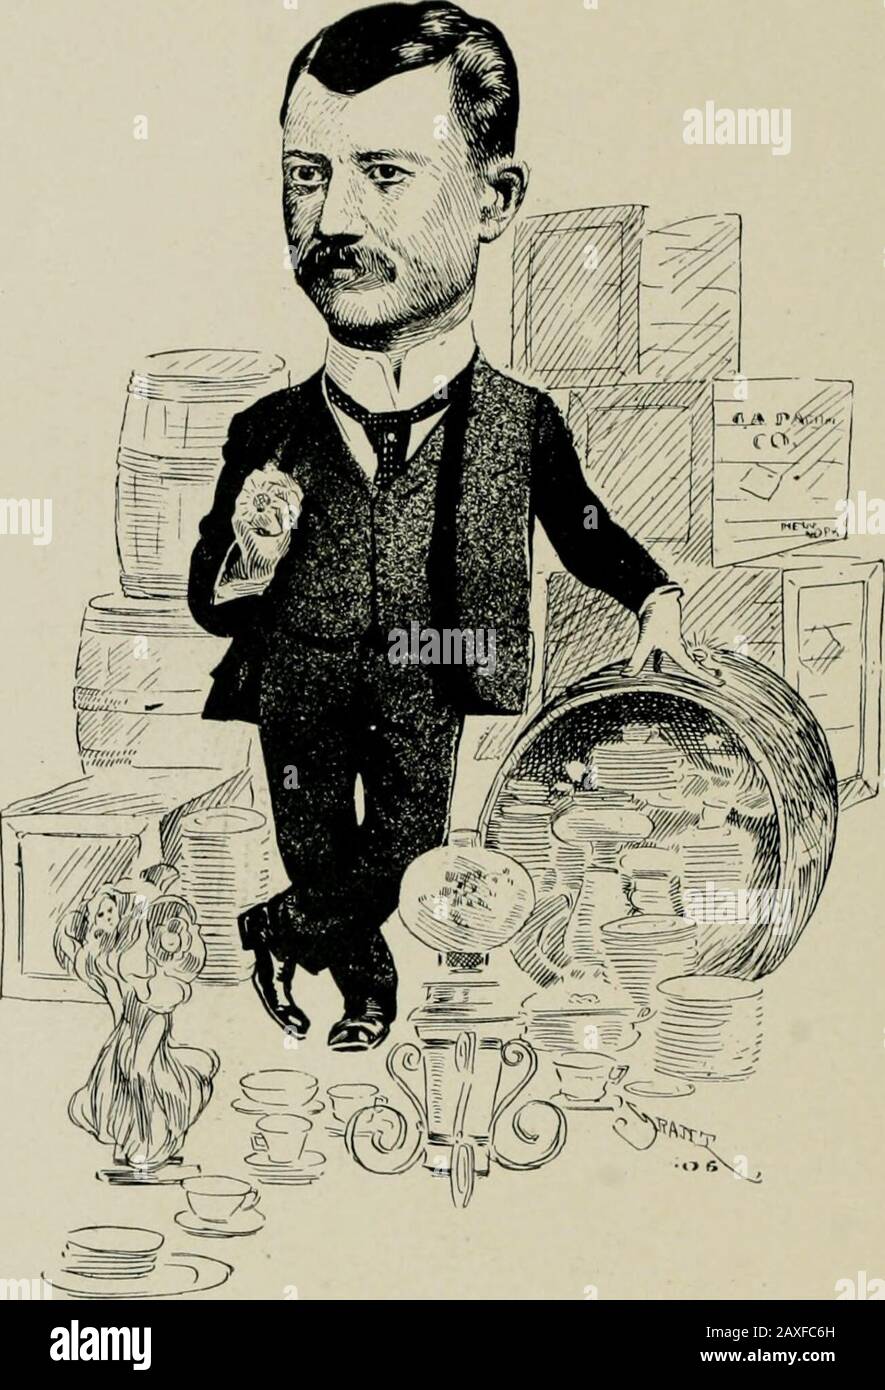 'As we see 'em,' a volume of cartoons and caricatures of Los Angeles citizens . Z. L. PARMELEK,President Z. I„ Parmelec Co.. C. A, PARMEI.EE,Vice President Parmelec-Dohrman Co. Stock Photo